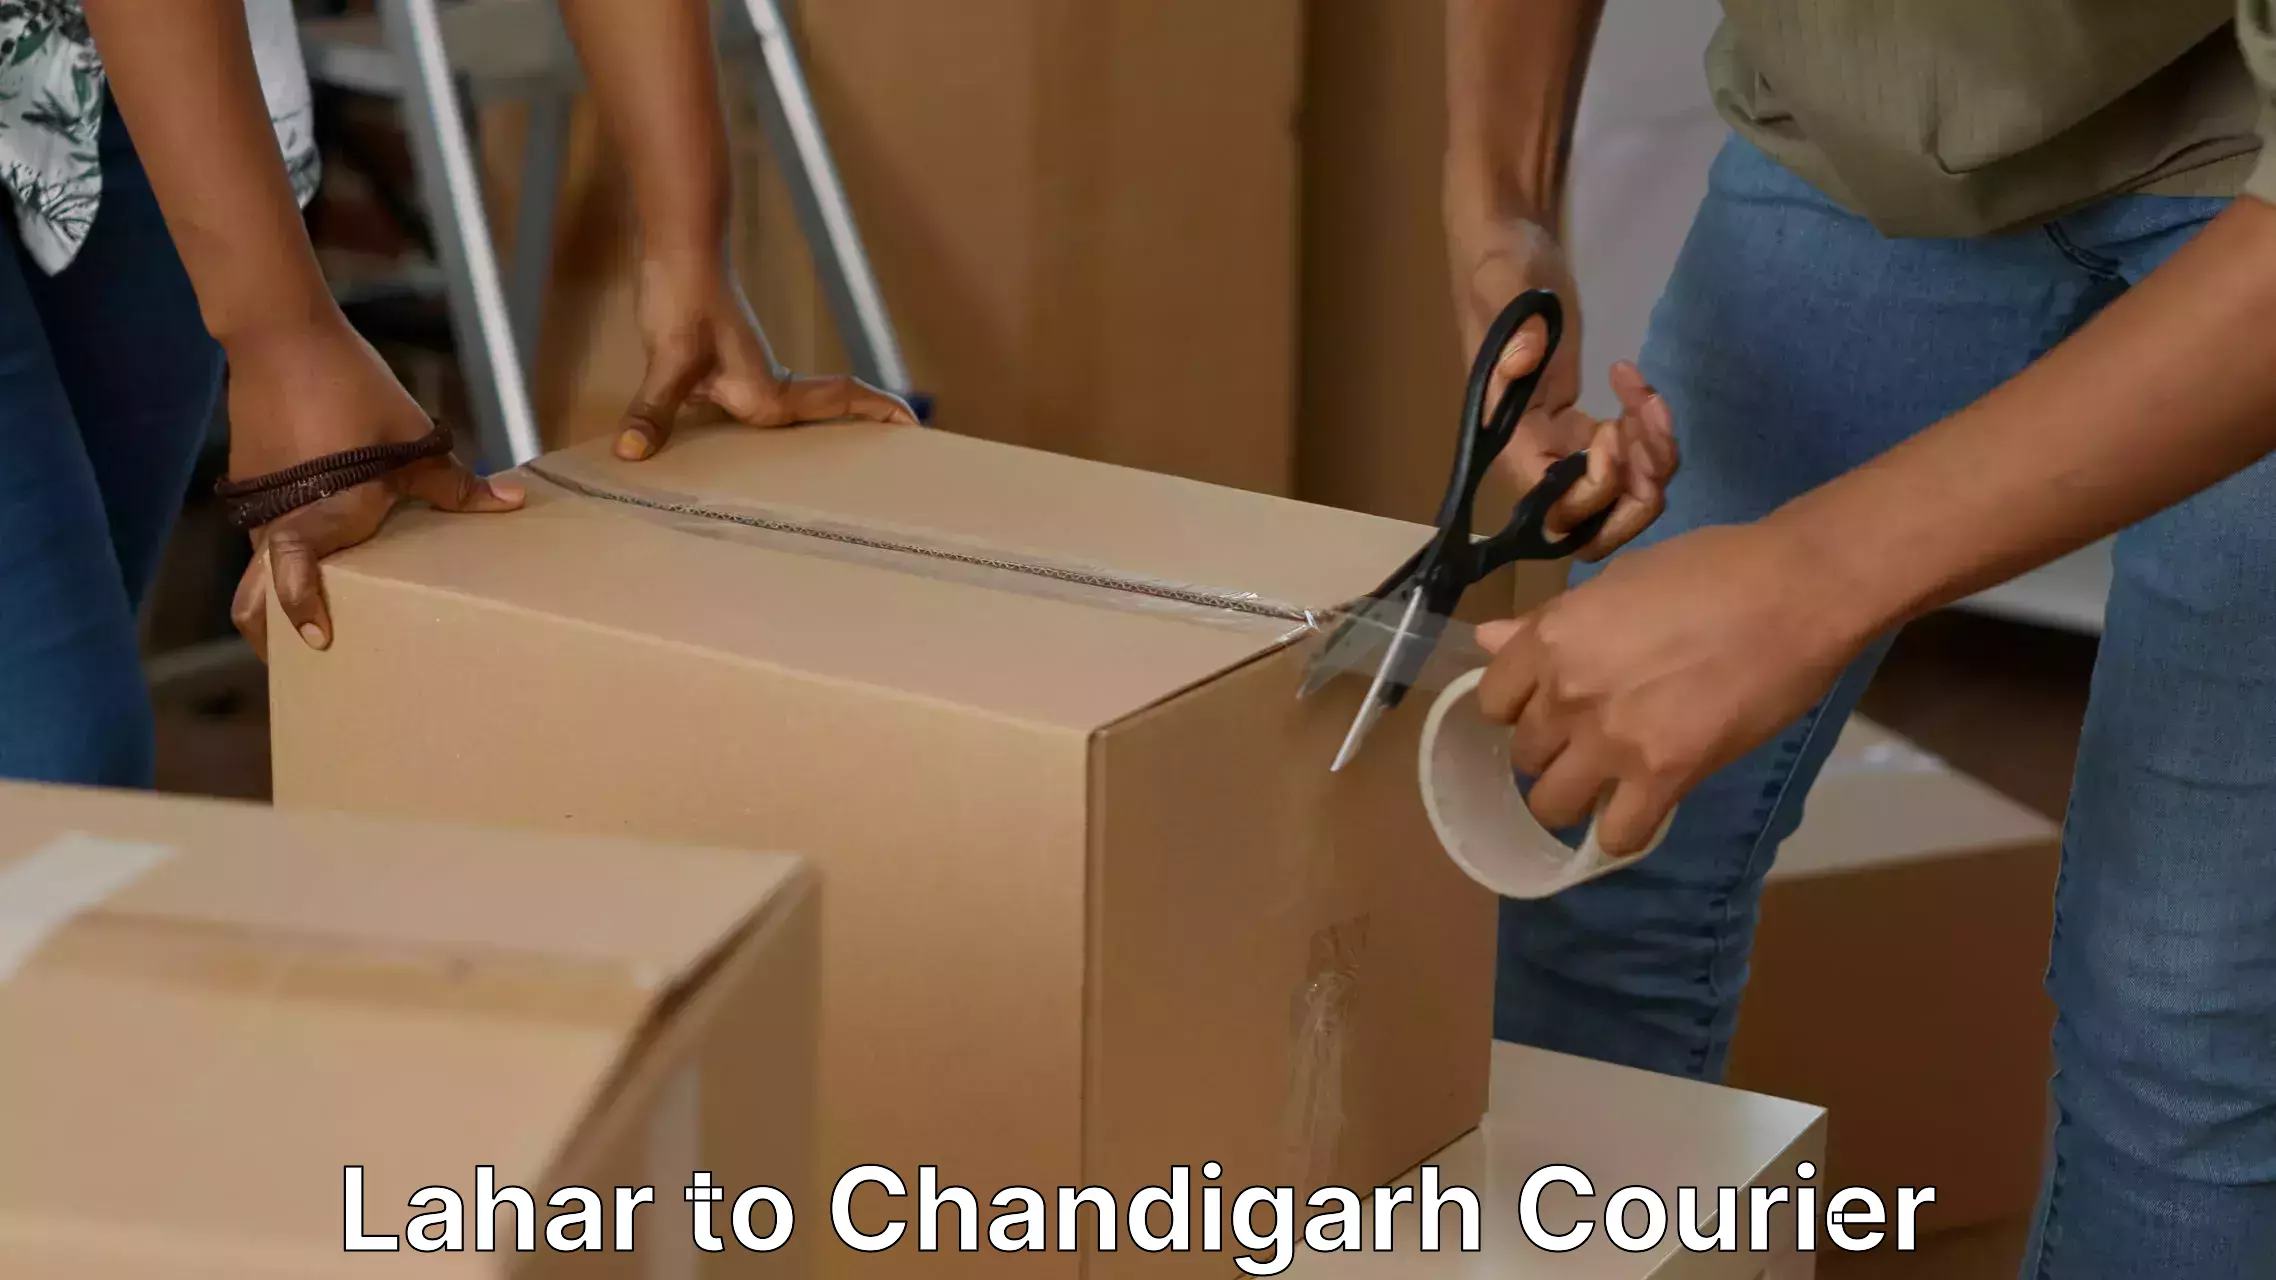 Skilled furniture transporters Lahar to Chandigarh